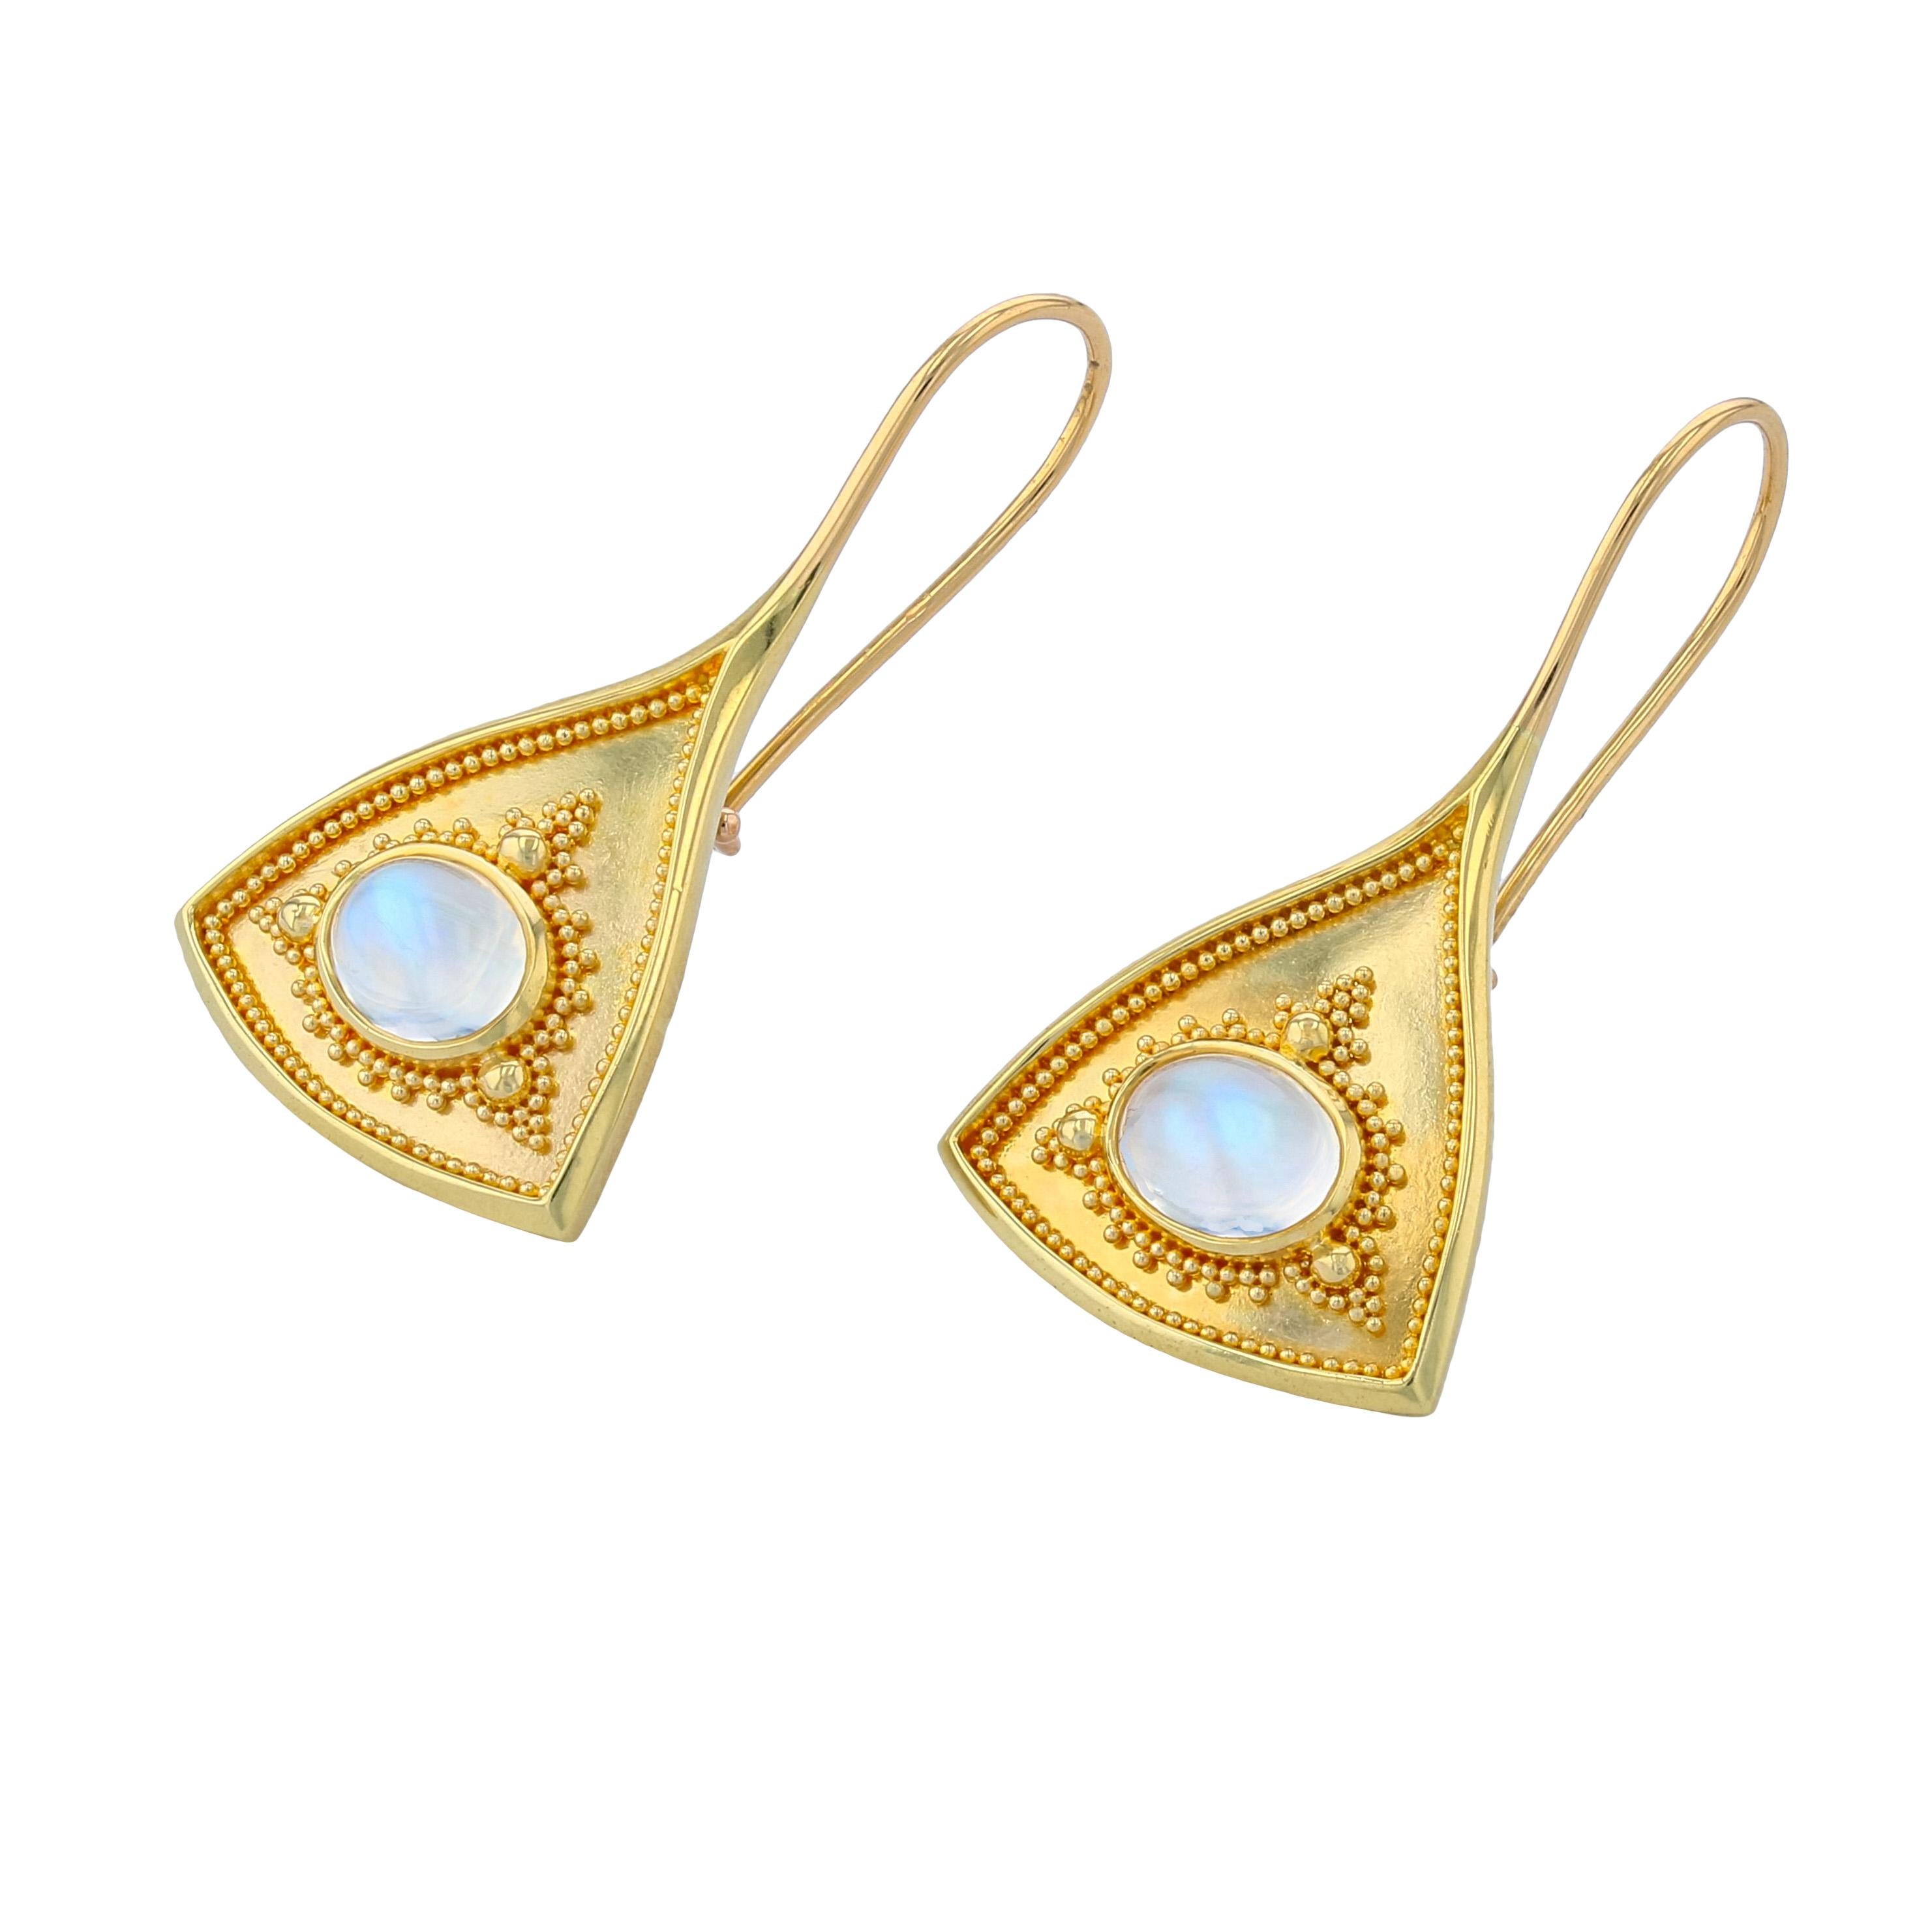 Oval Cut Kent Raible 18 Karat Gold Moonstone Drop Earrings with Gold Granulation For Sale